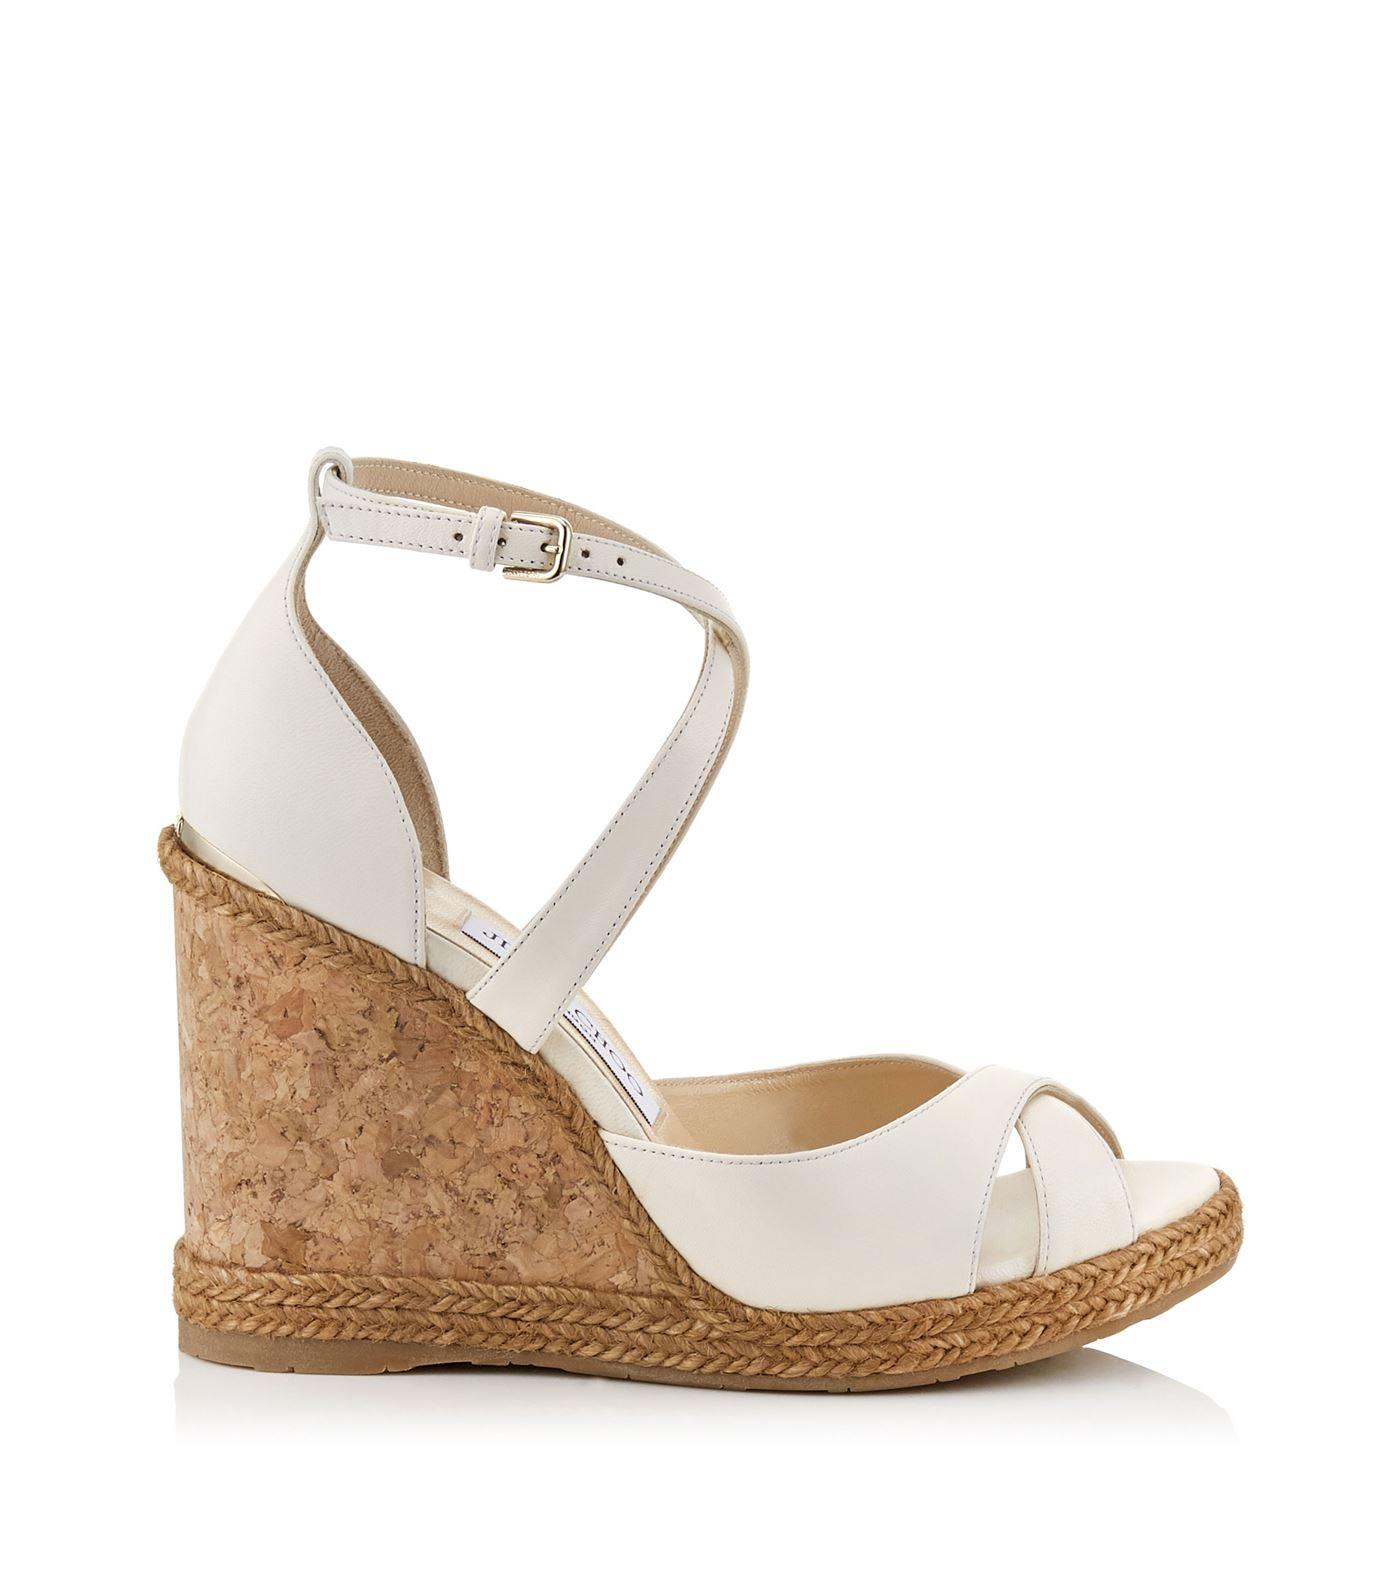 Jimmy Choo Alanah 105 Leather Wedges in White - Lyst